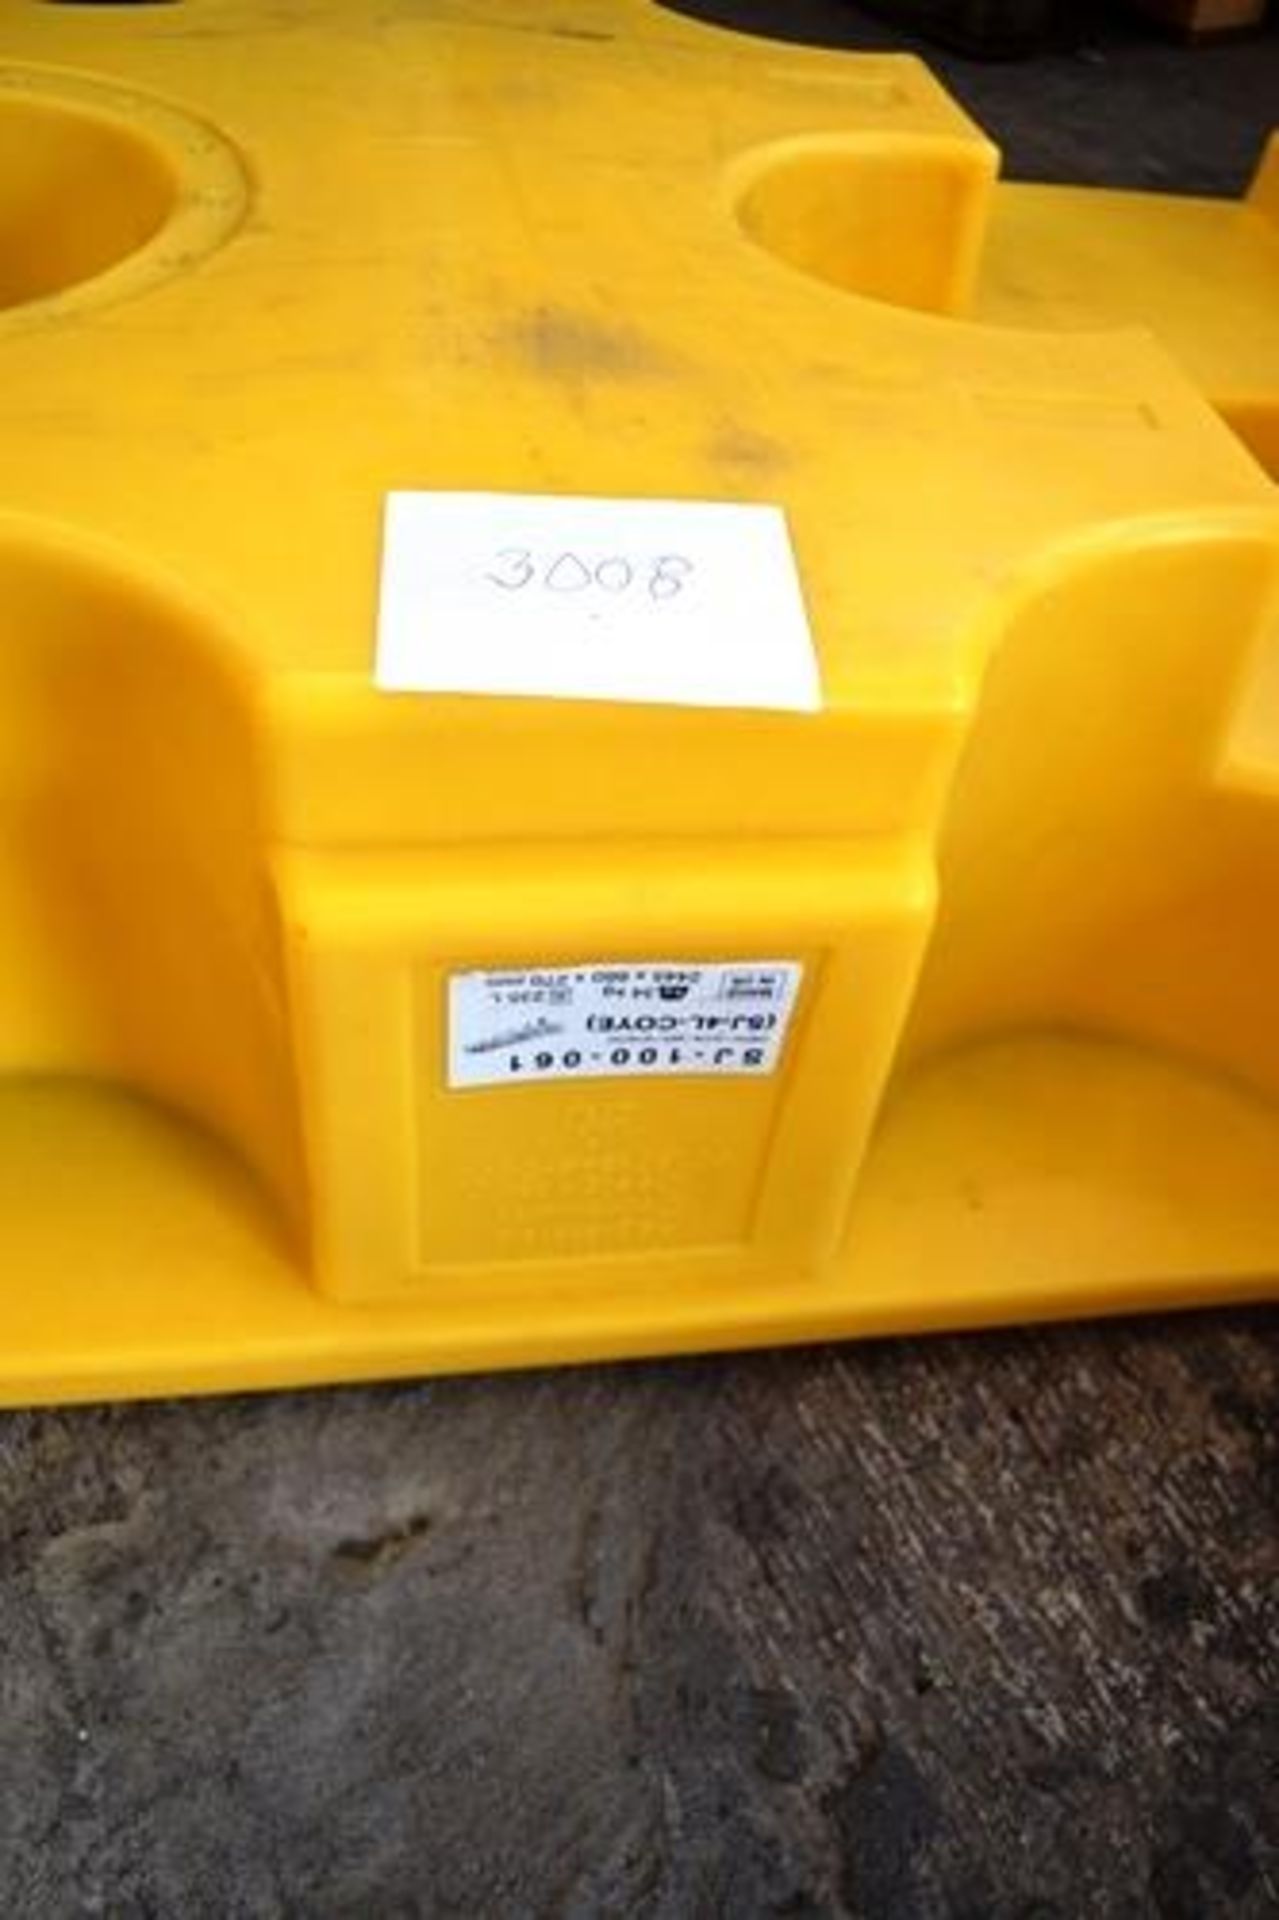 3 x plastic base stands comprising 1 x SJ-100-061 and 2 x unbranded black plastic base stands size